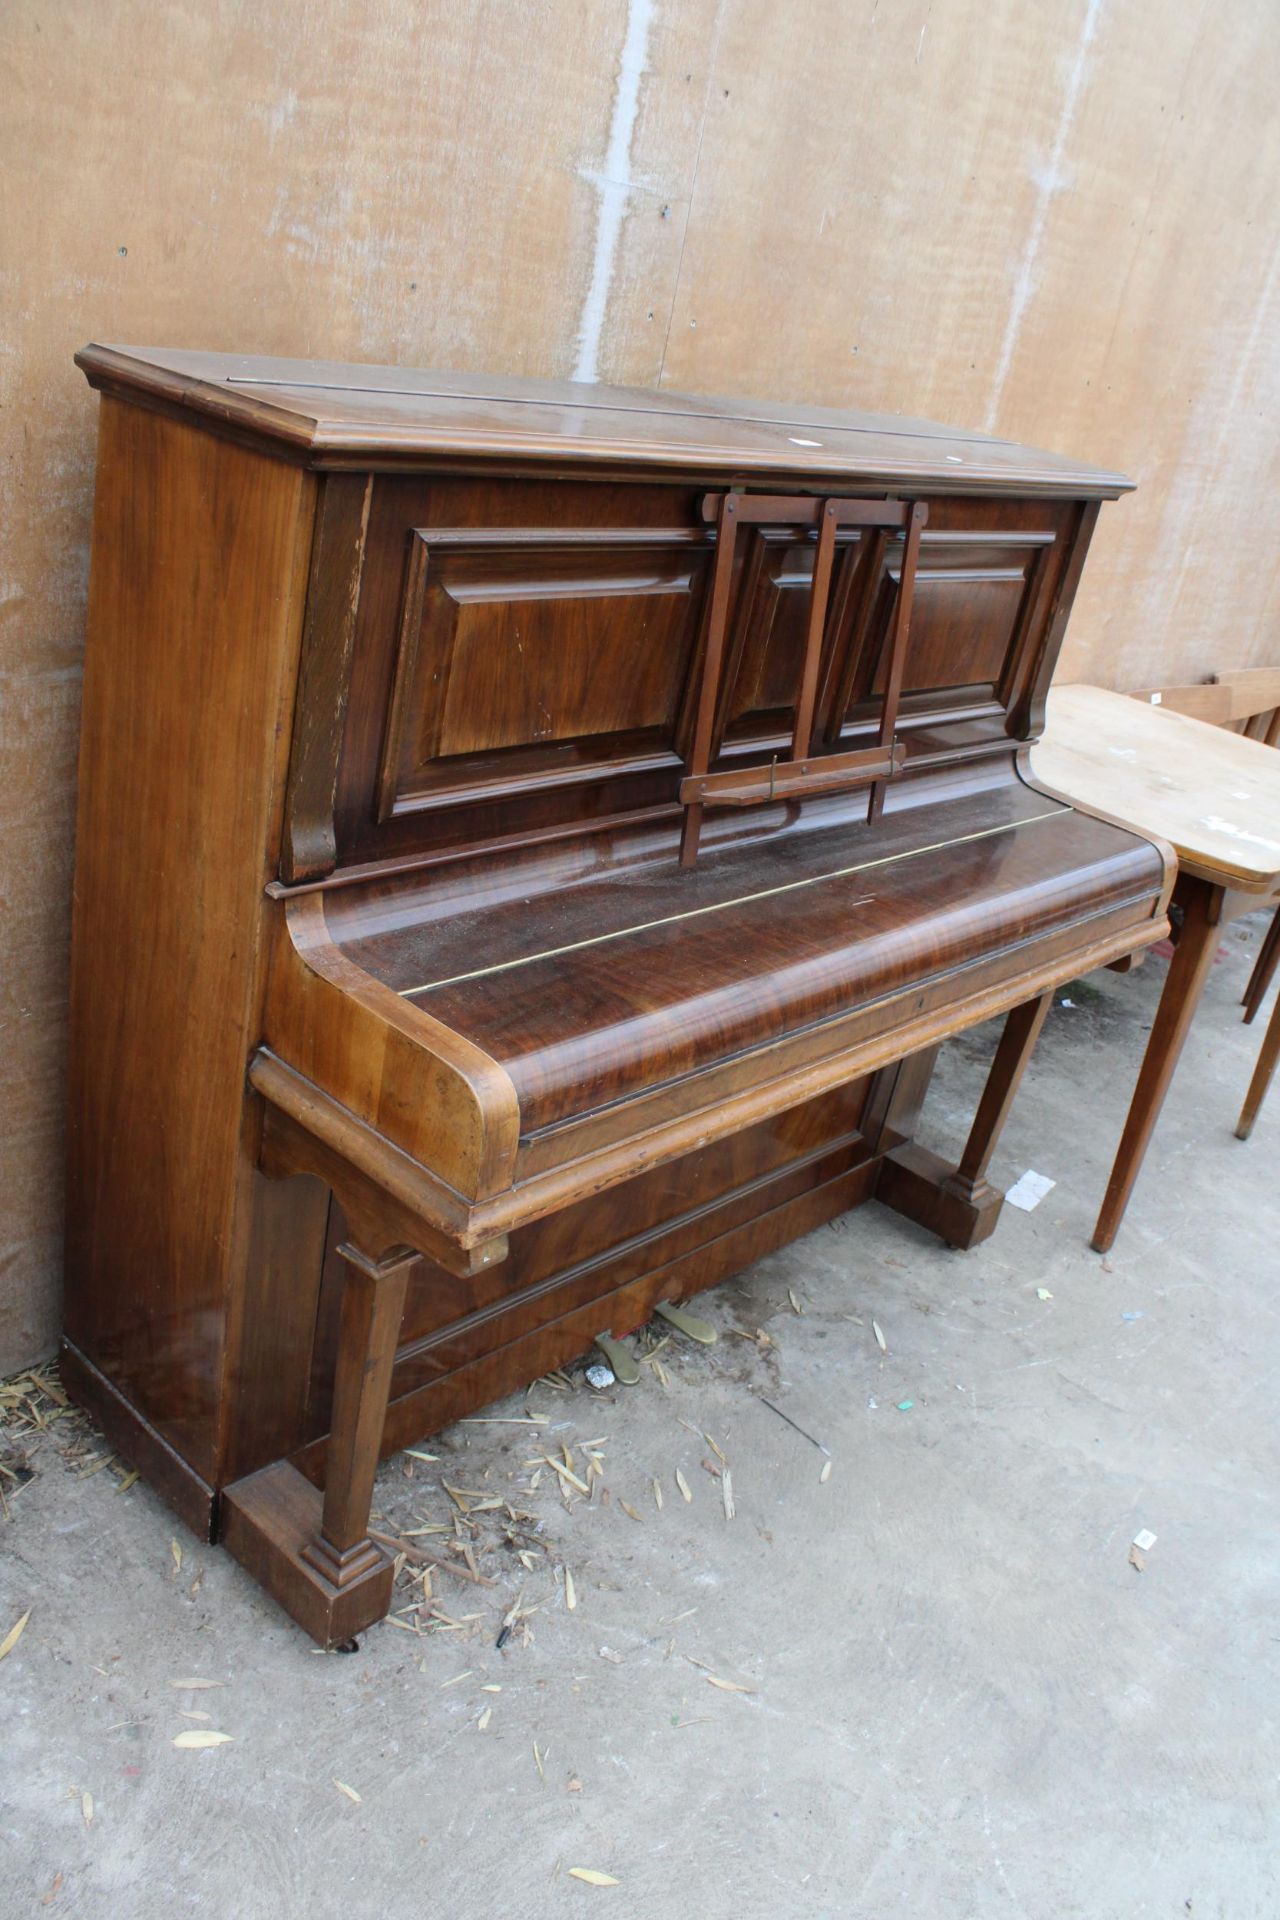 A ROLAND WARNER (LONDON) UPRIGHT PIANO - Image 2 of 5